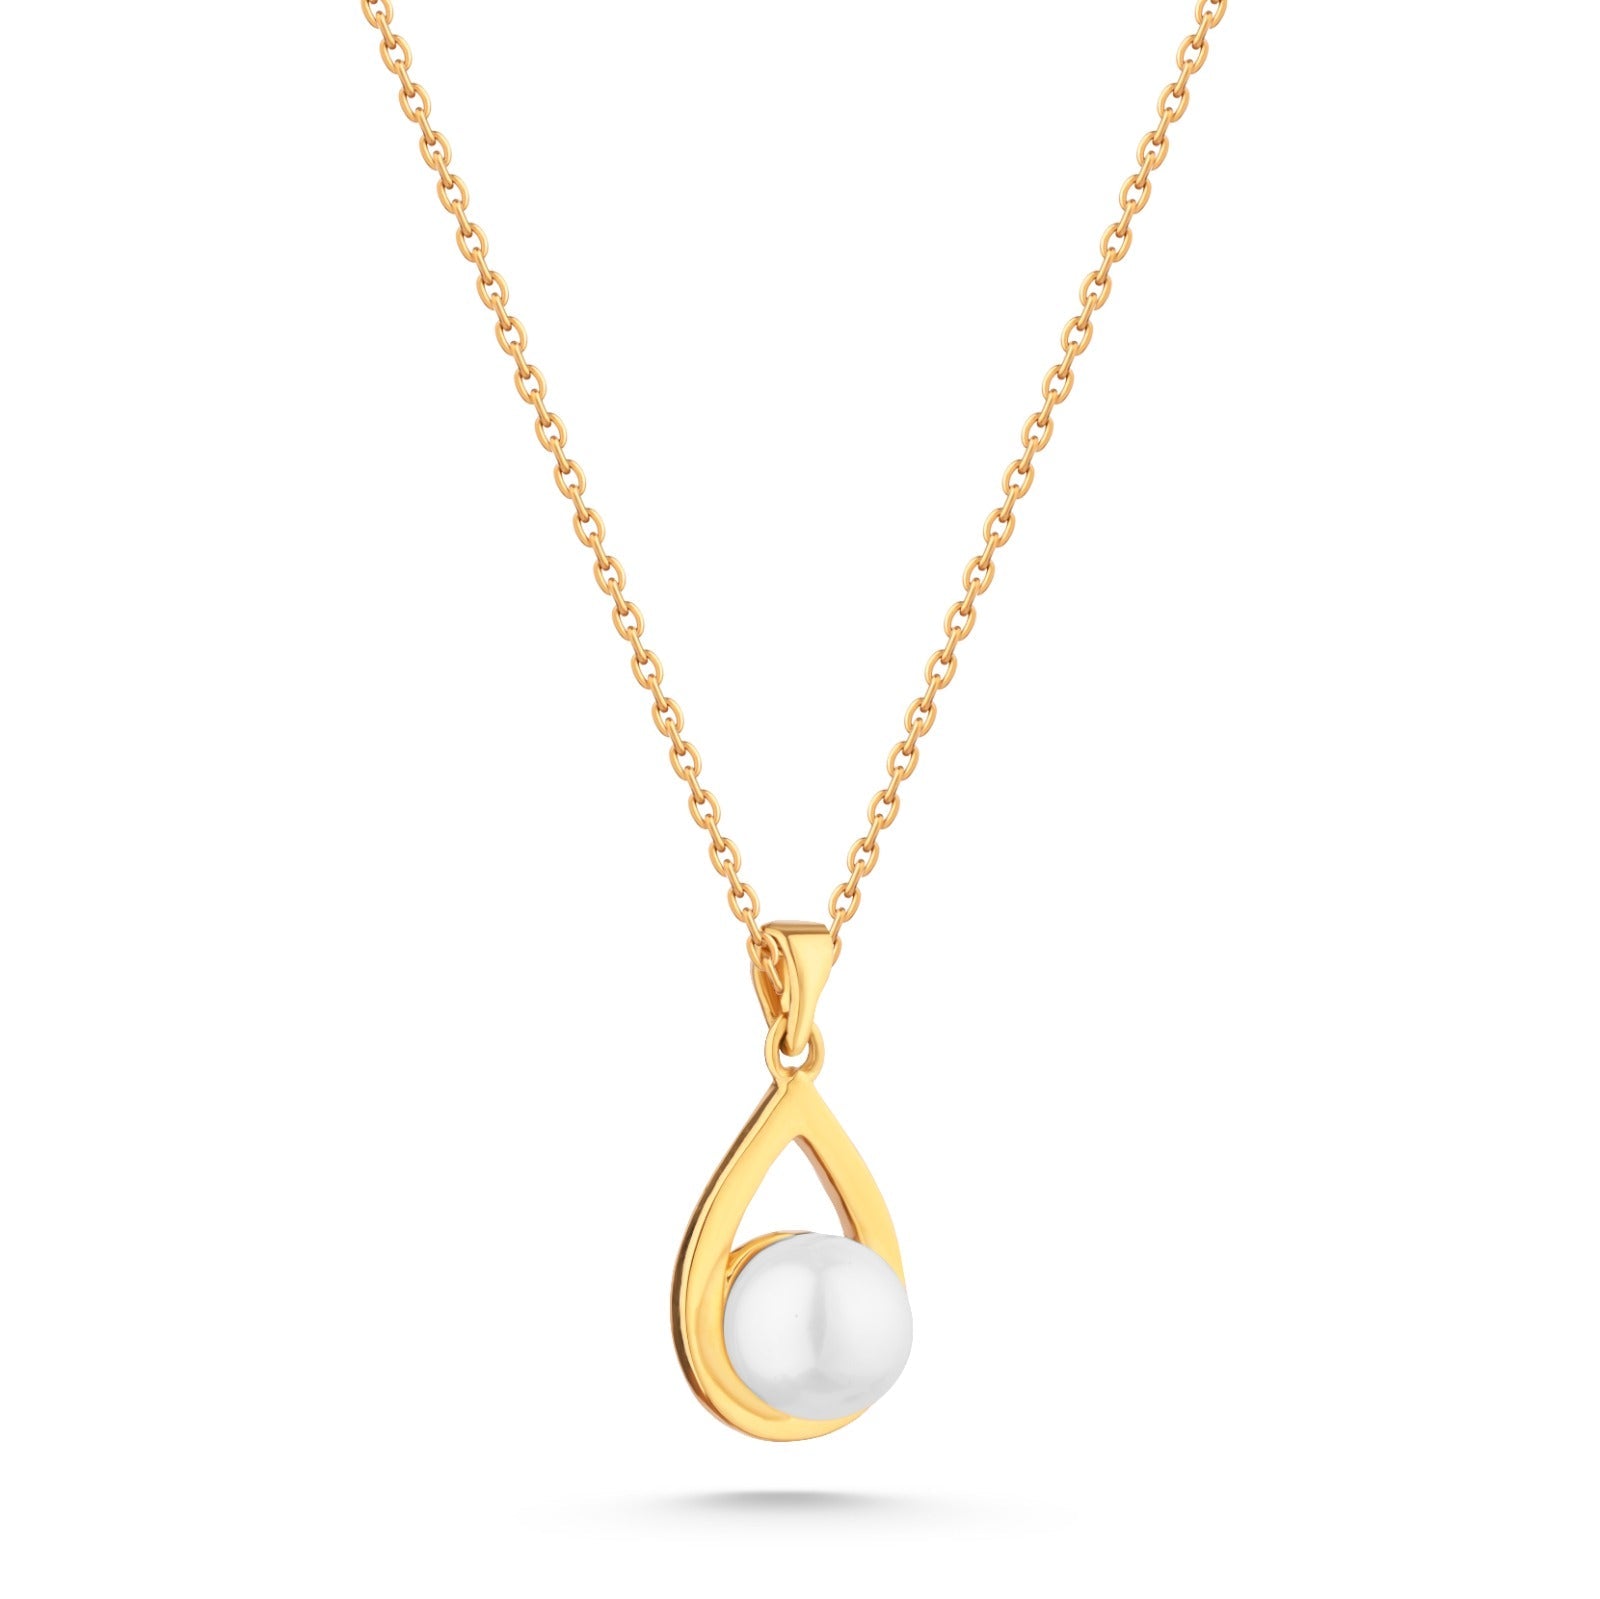 Simple dangling pearl in 18k Gold necklace - j-p018c